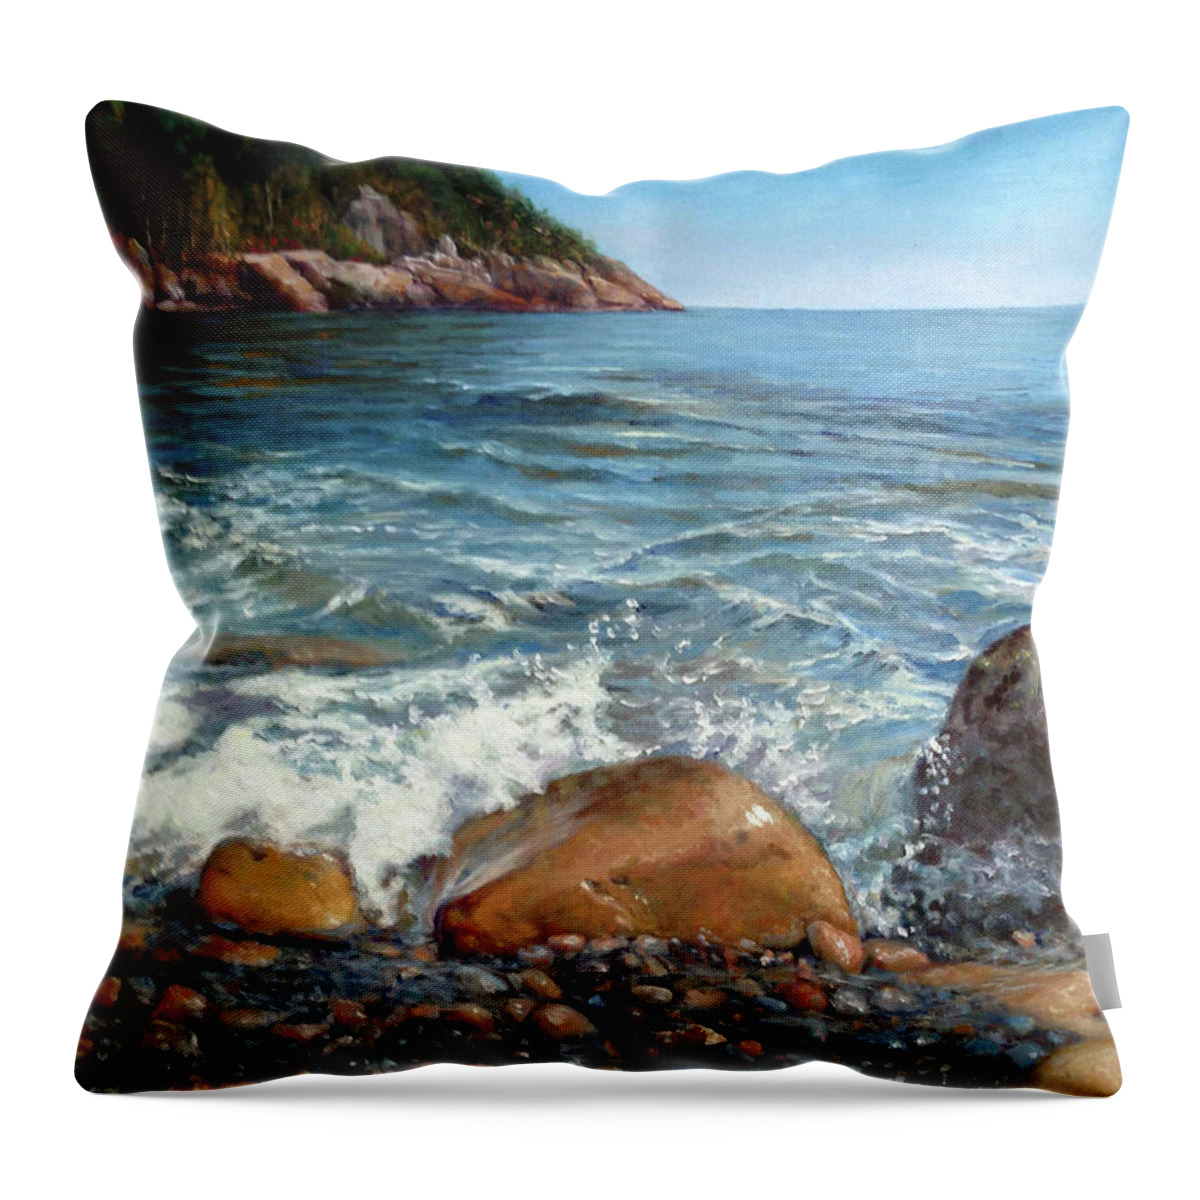 Maine Coast Throw Pillow featuring the painting Maine Coast by Marie Witte